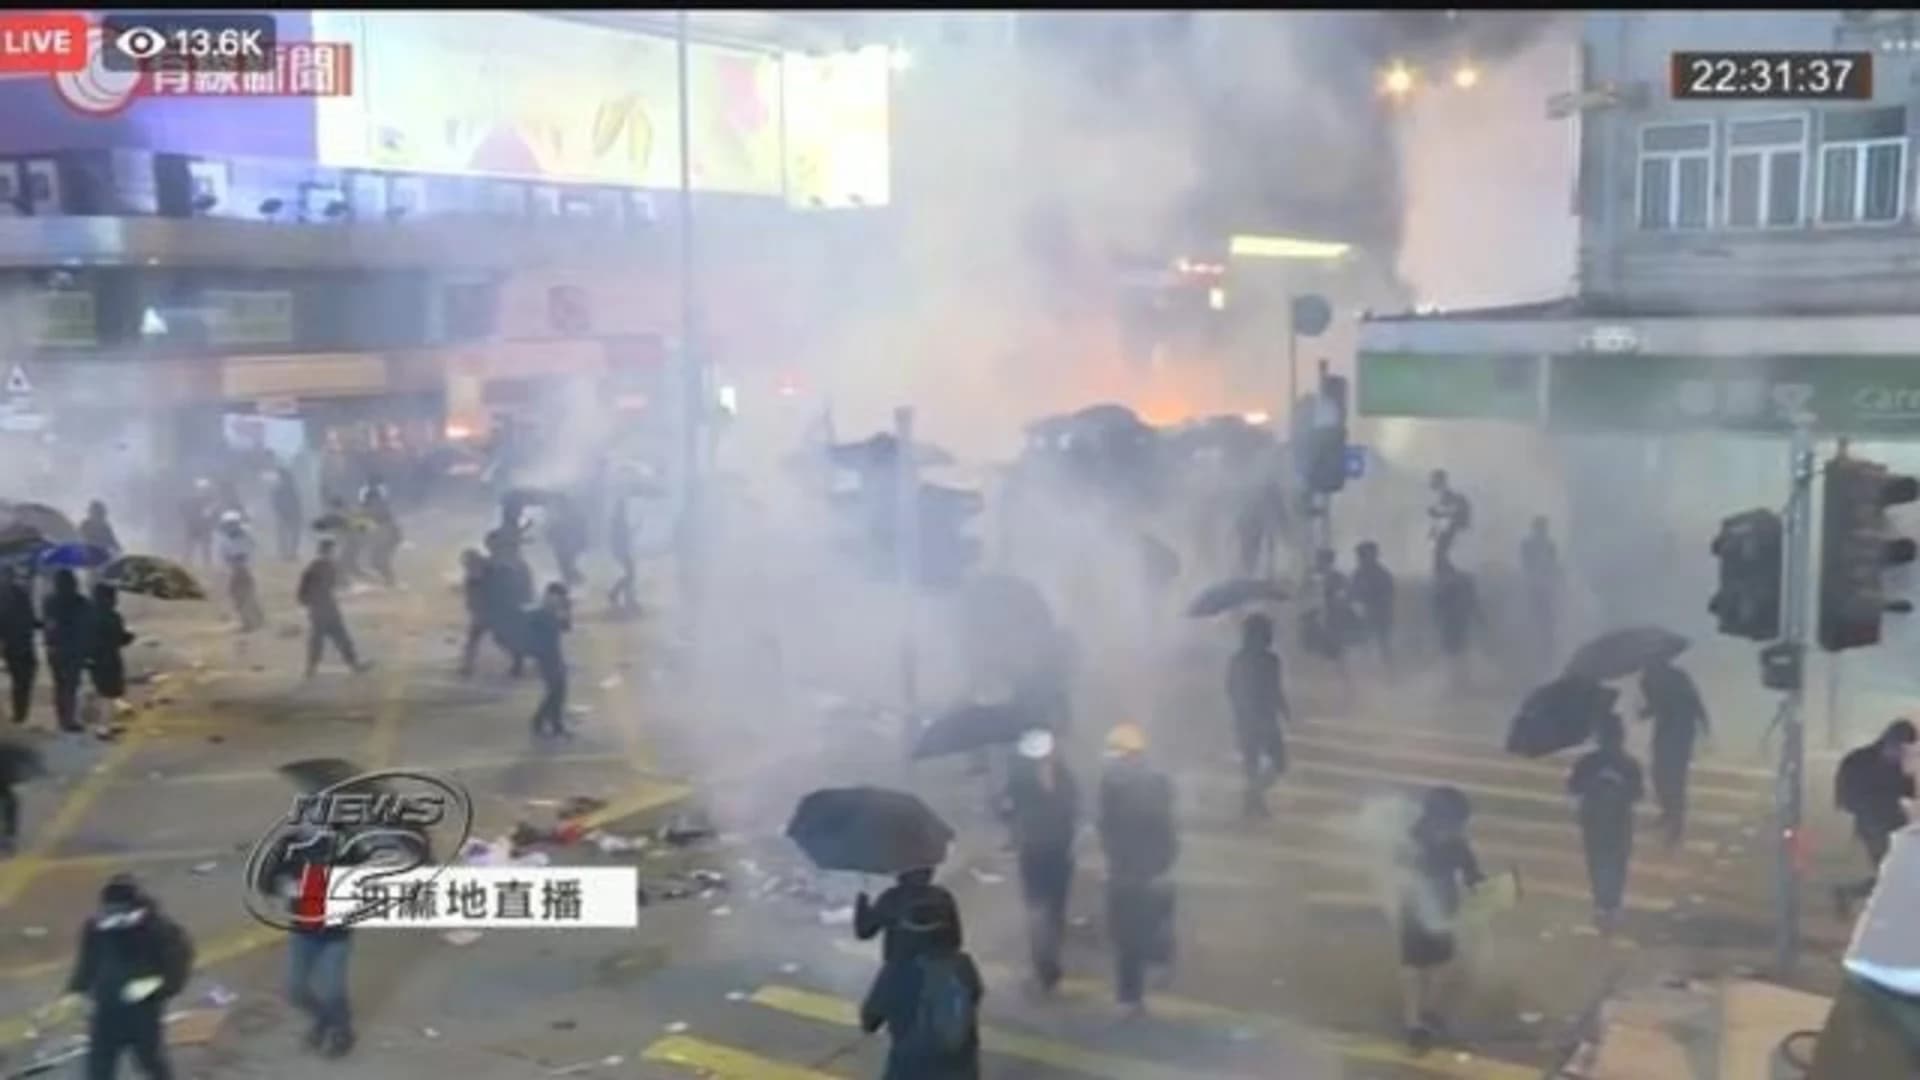 100 protesters still holed up in Hong Kong university